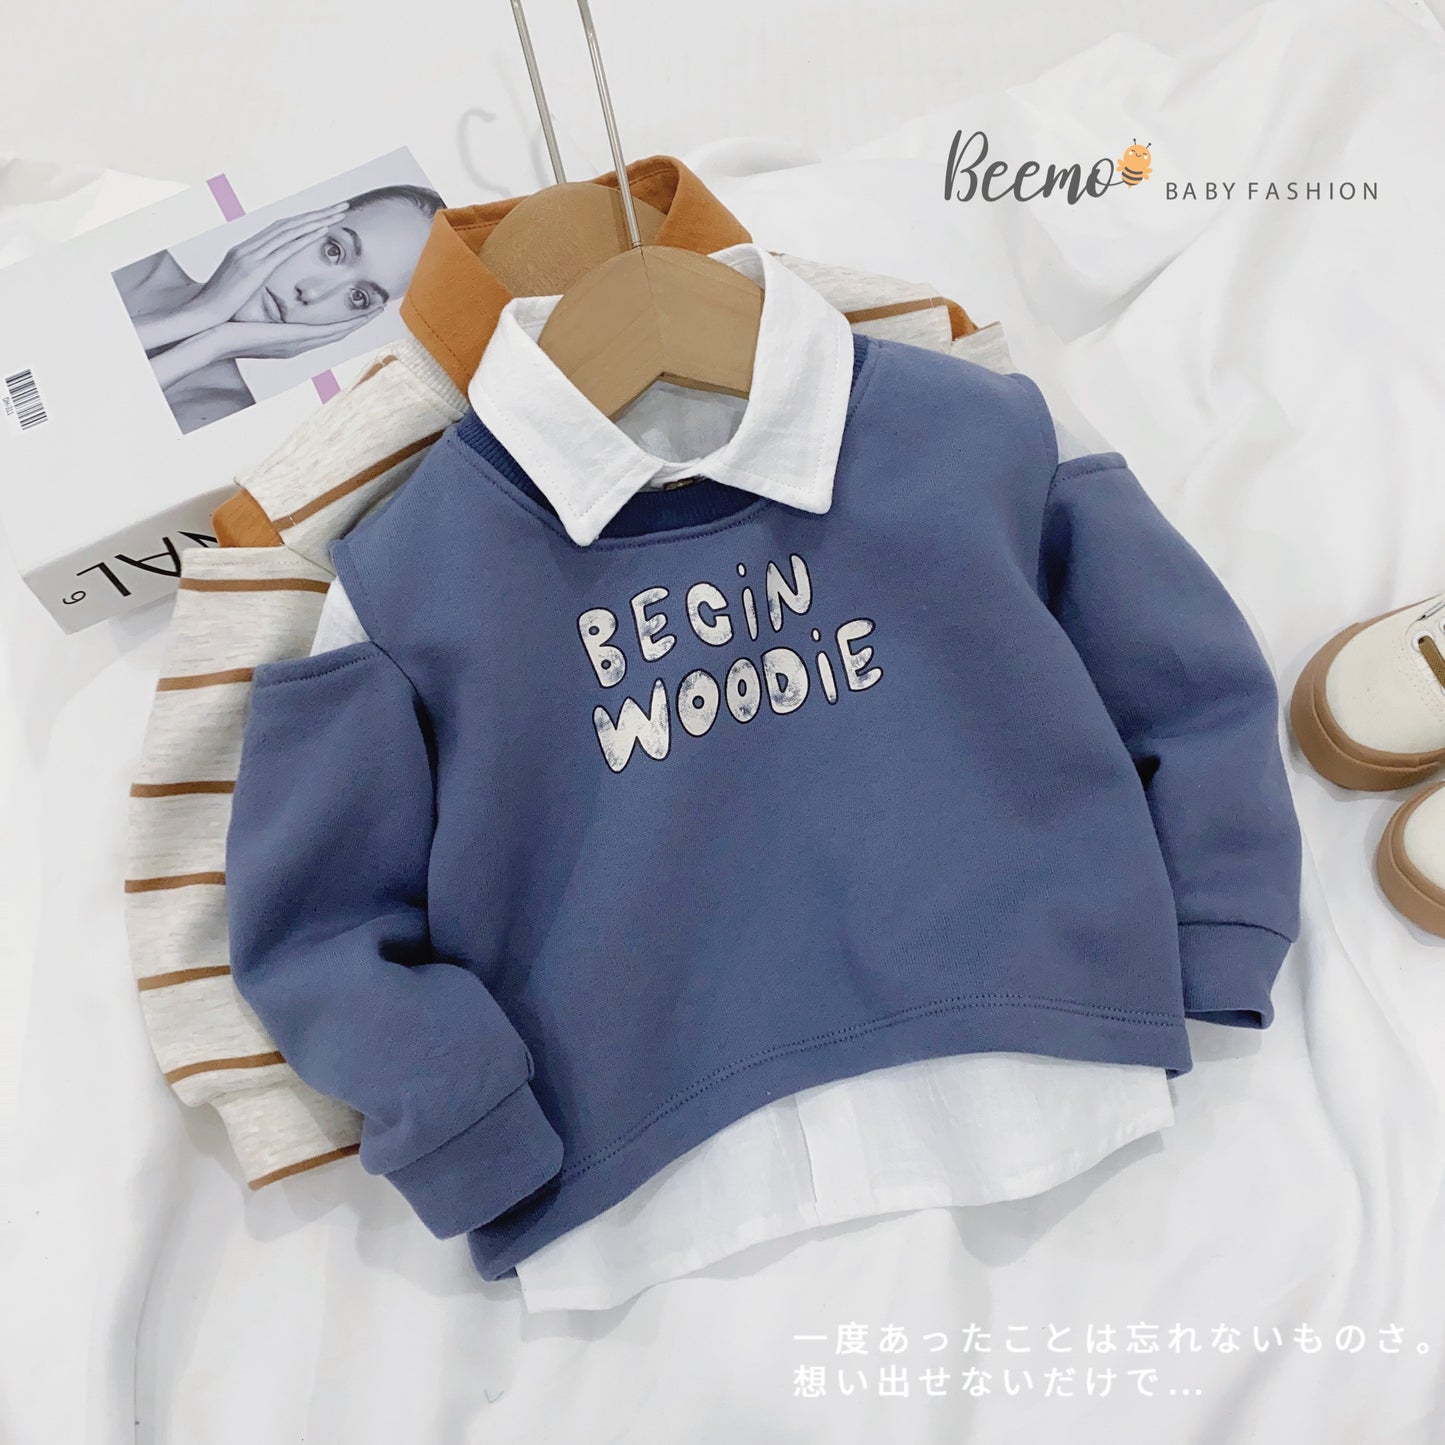 BEGIN WOODIE SHIRT AND SWEATER SET